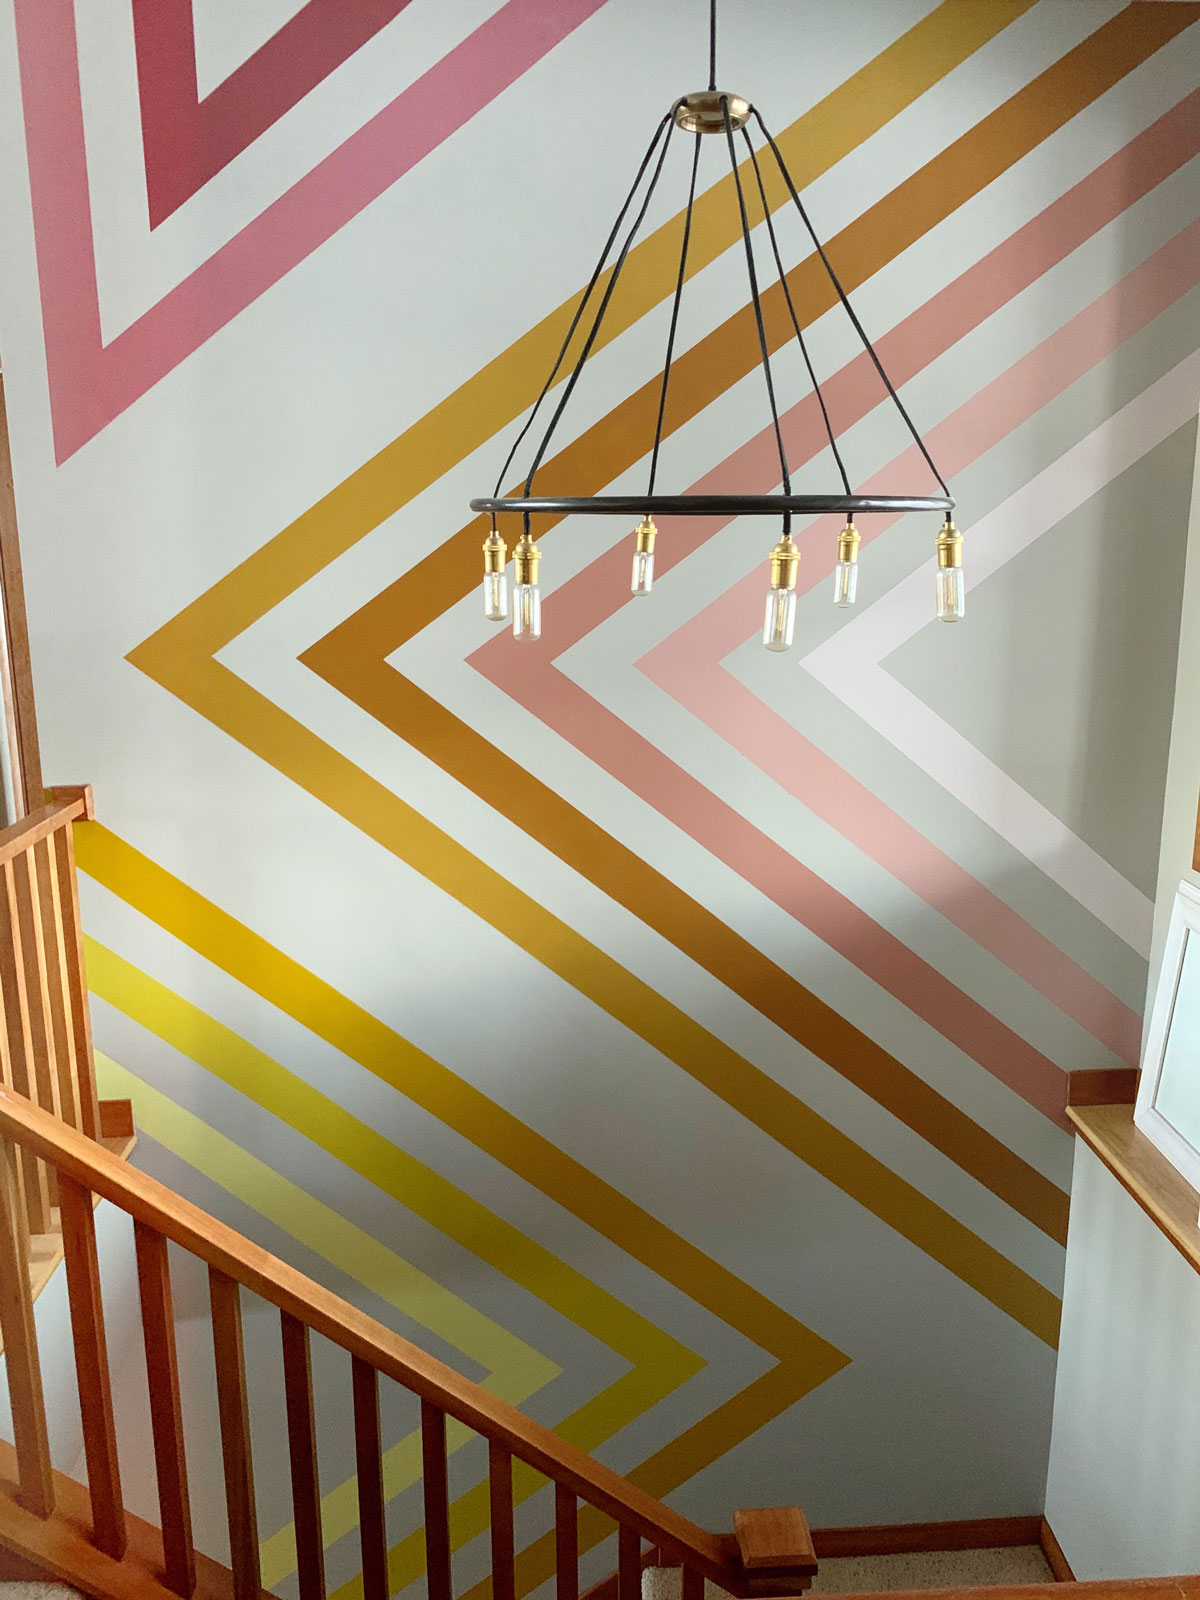 Stairway wall mural + my creative challenge for 2020